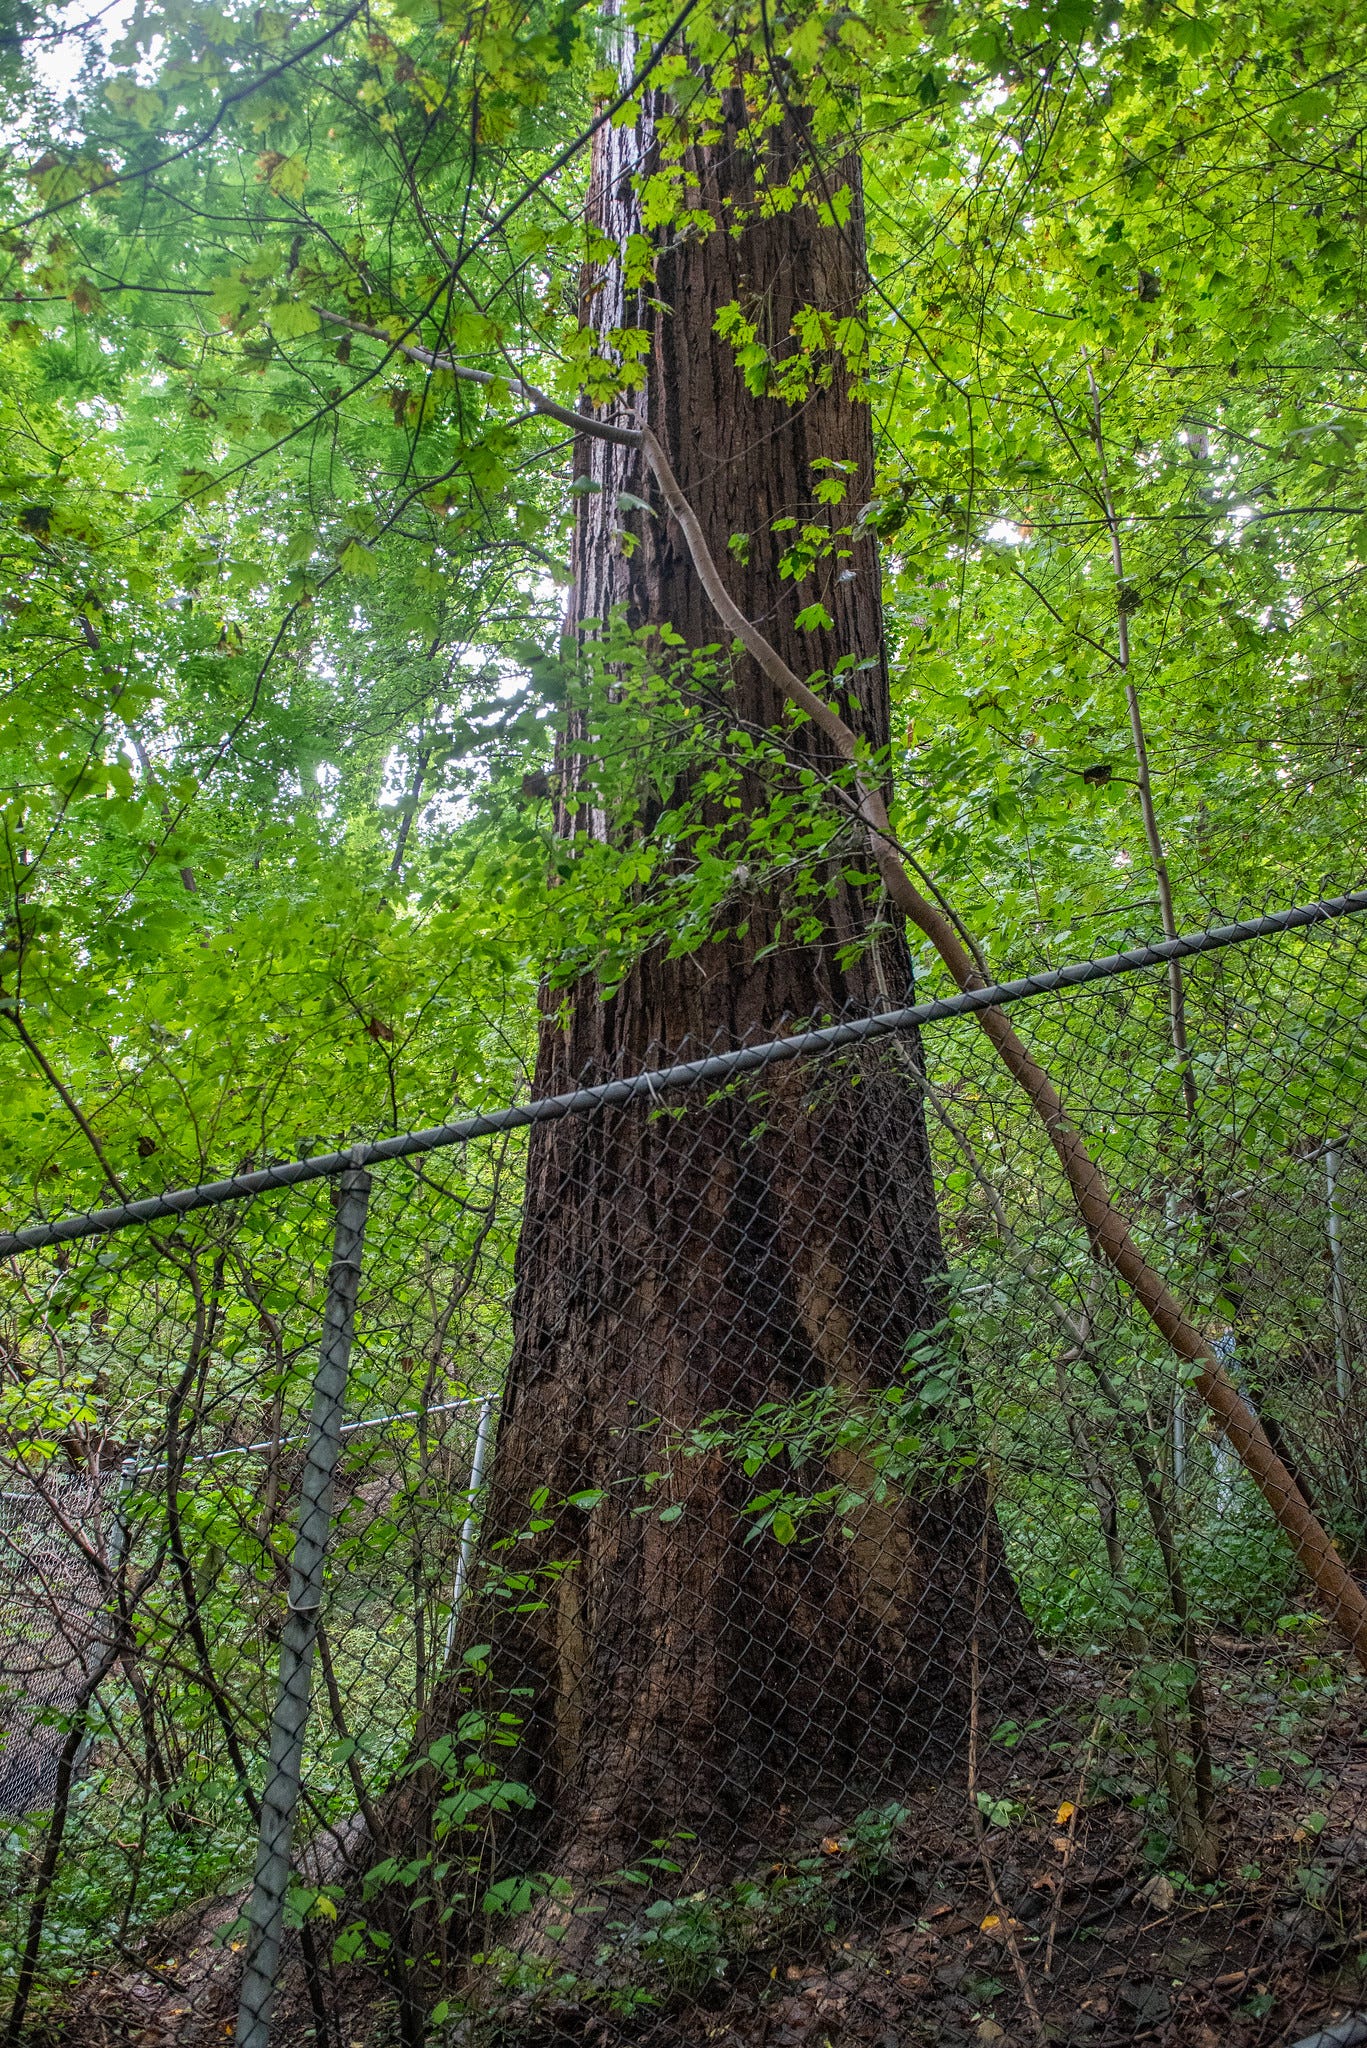 ID: The Alley Pond Giant tree in all its glory, hemmed in by a chainlink fence